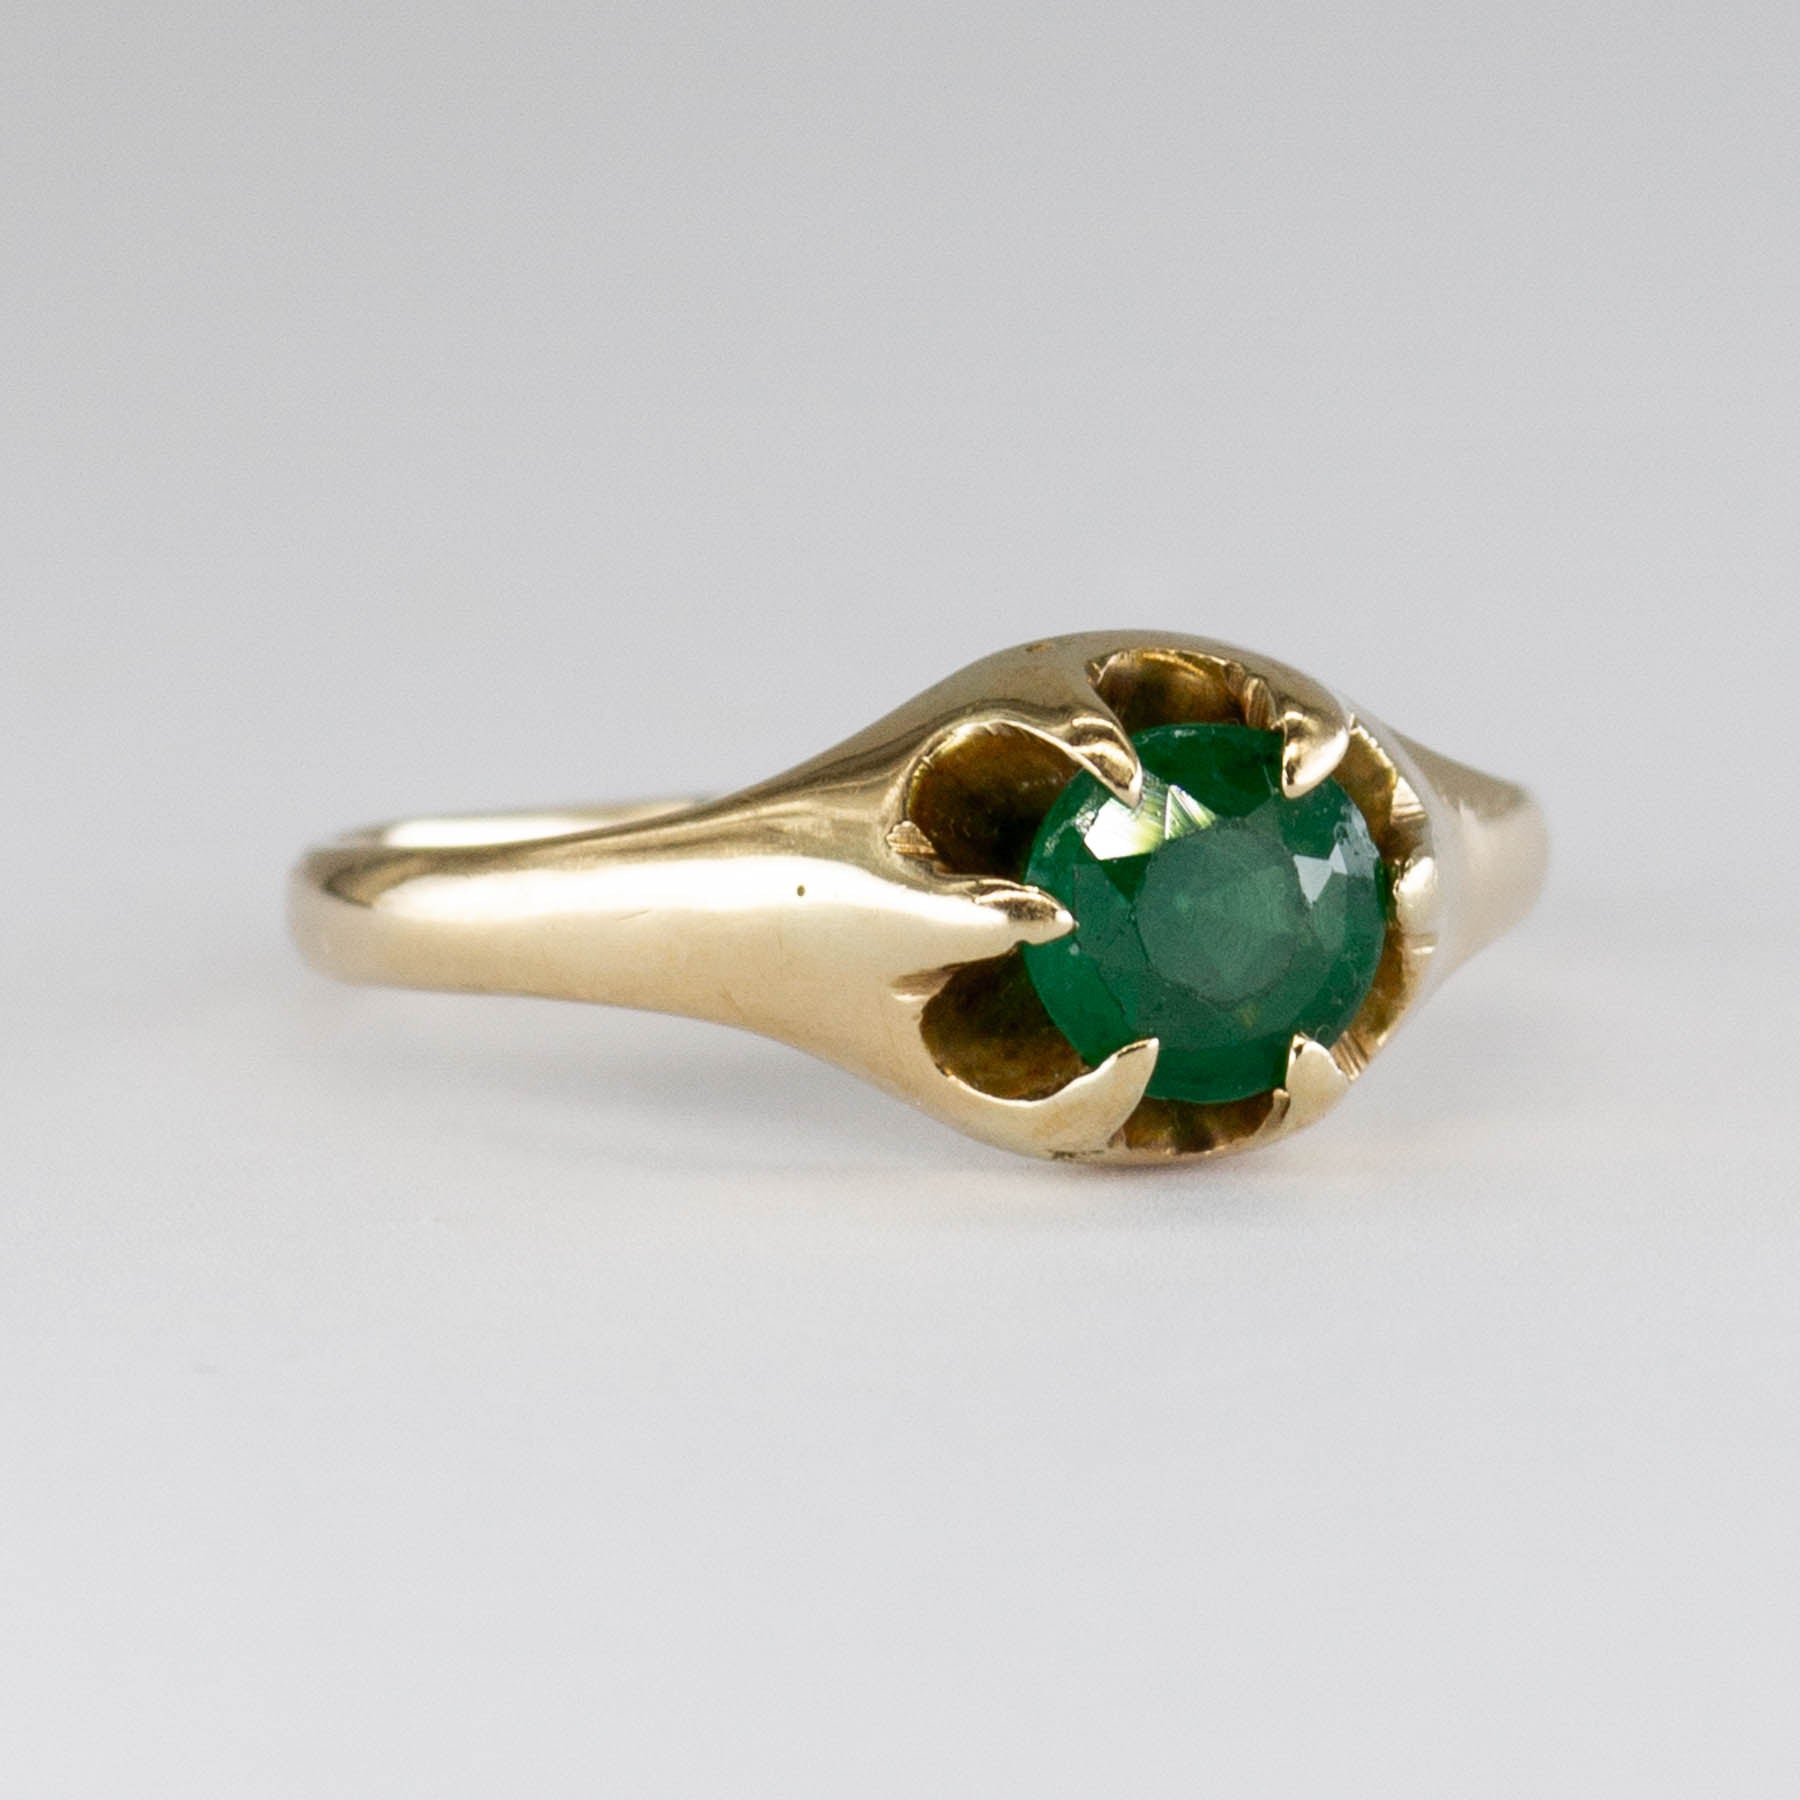 Vintage Green Glass Doublet 14k Ring | 0.50ct | SZ 4.75 |